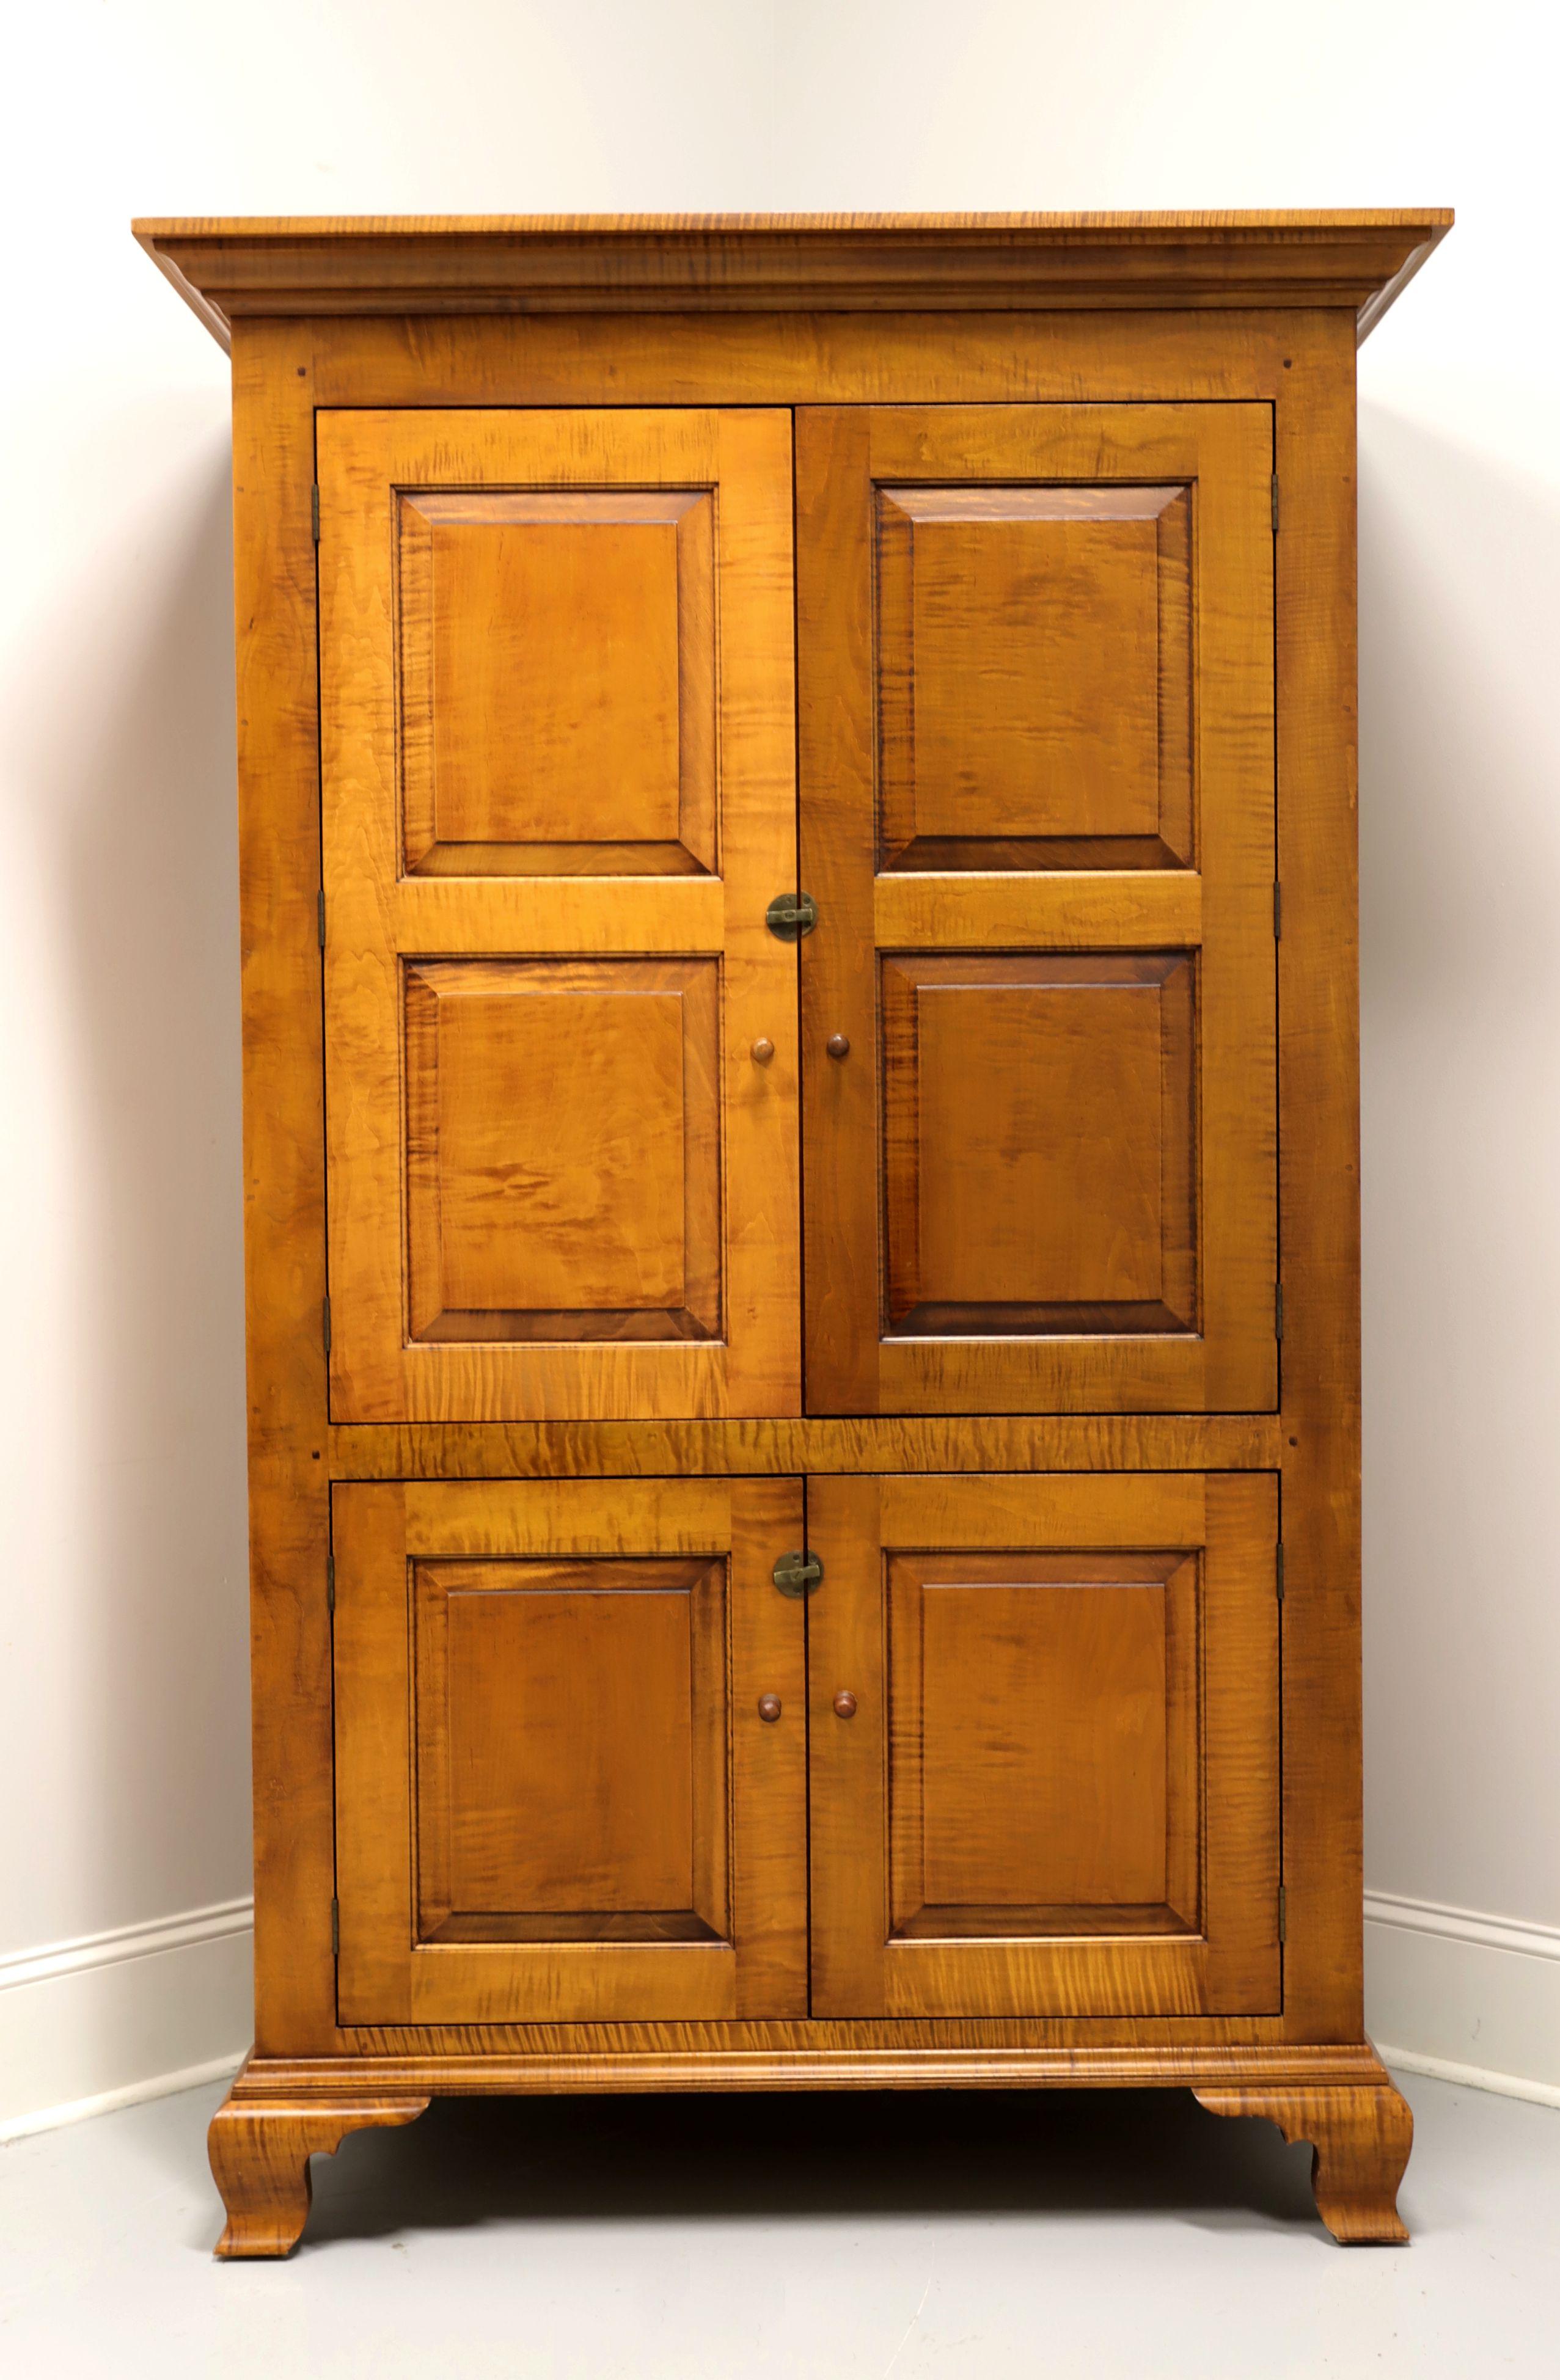 A Chippendale style linen press by JL Treharn. Solid tiger maple with brass hardware, crown molding and ogee bracket feet. Upper cabinet features an ample storage area with two adjustable wood shelves behind dual solid wood doors. Lower cabinet has